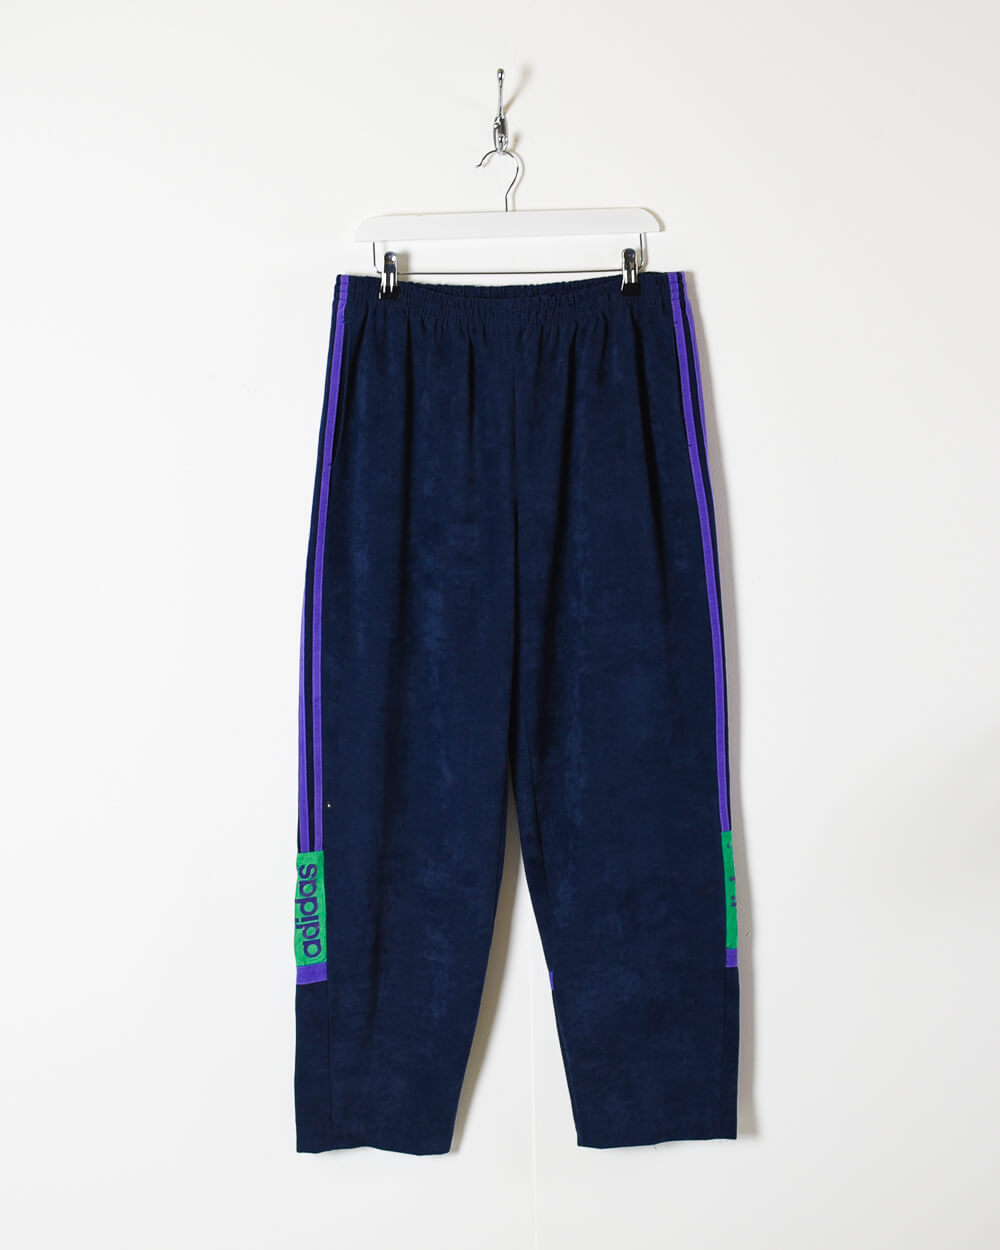 Navy Adidas Velour Tracksuit Bottoms - W38 L30